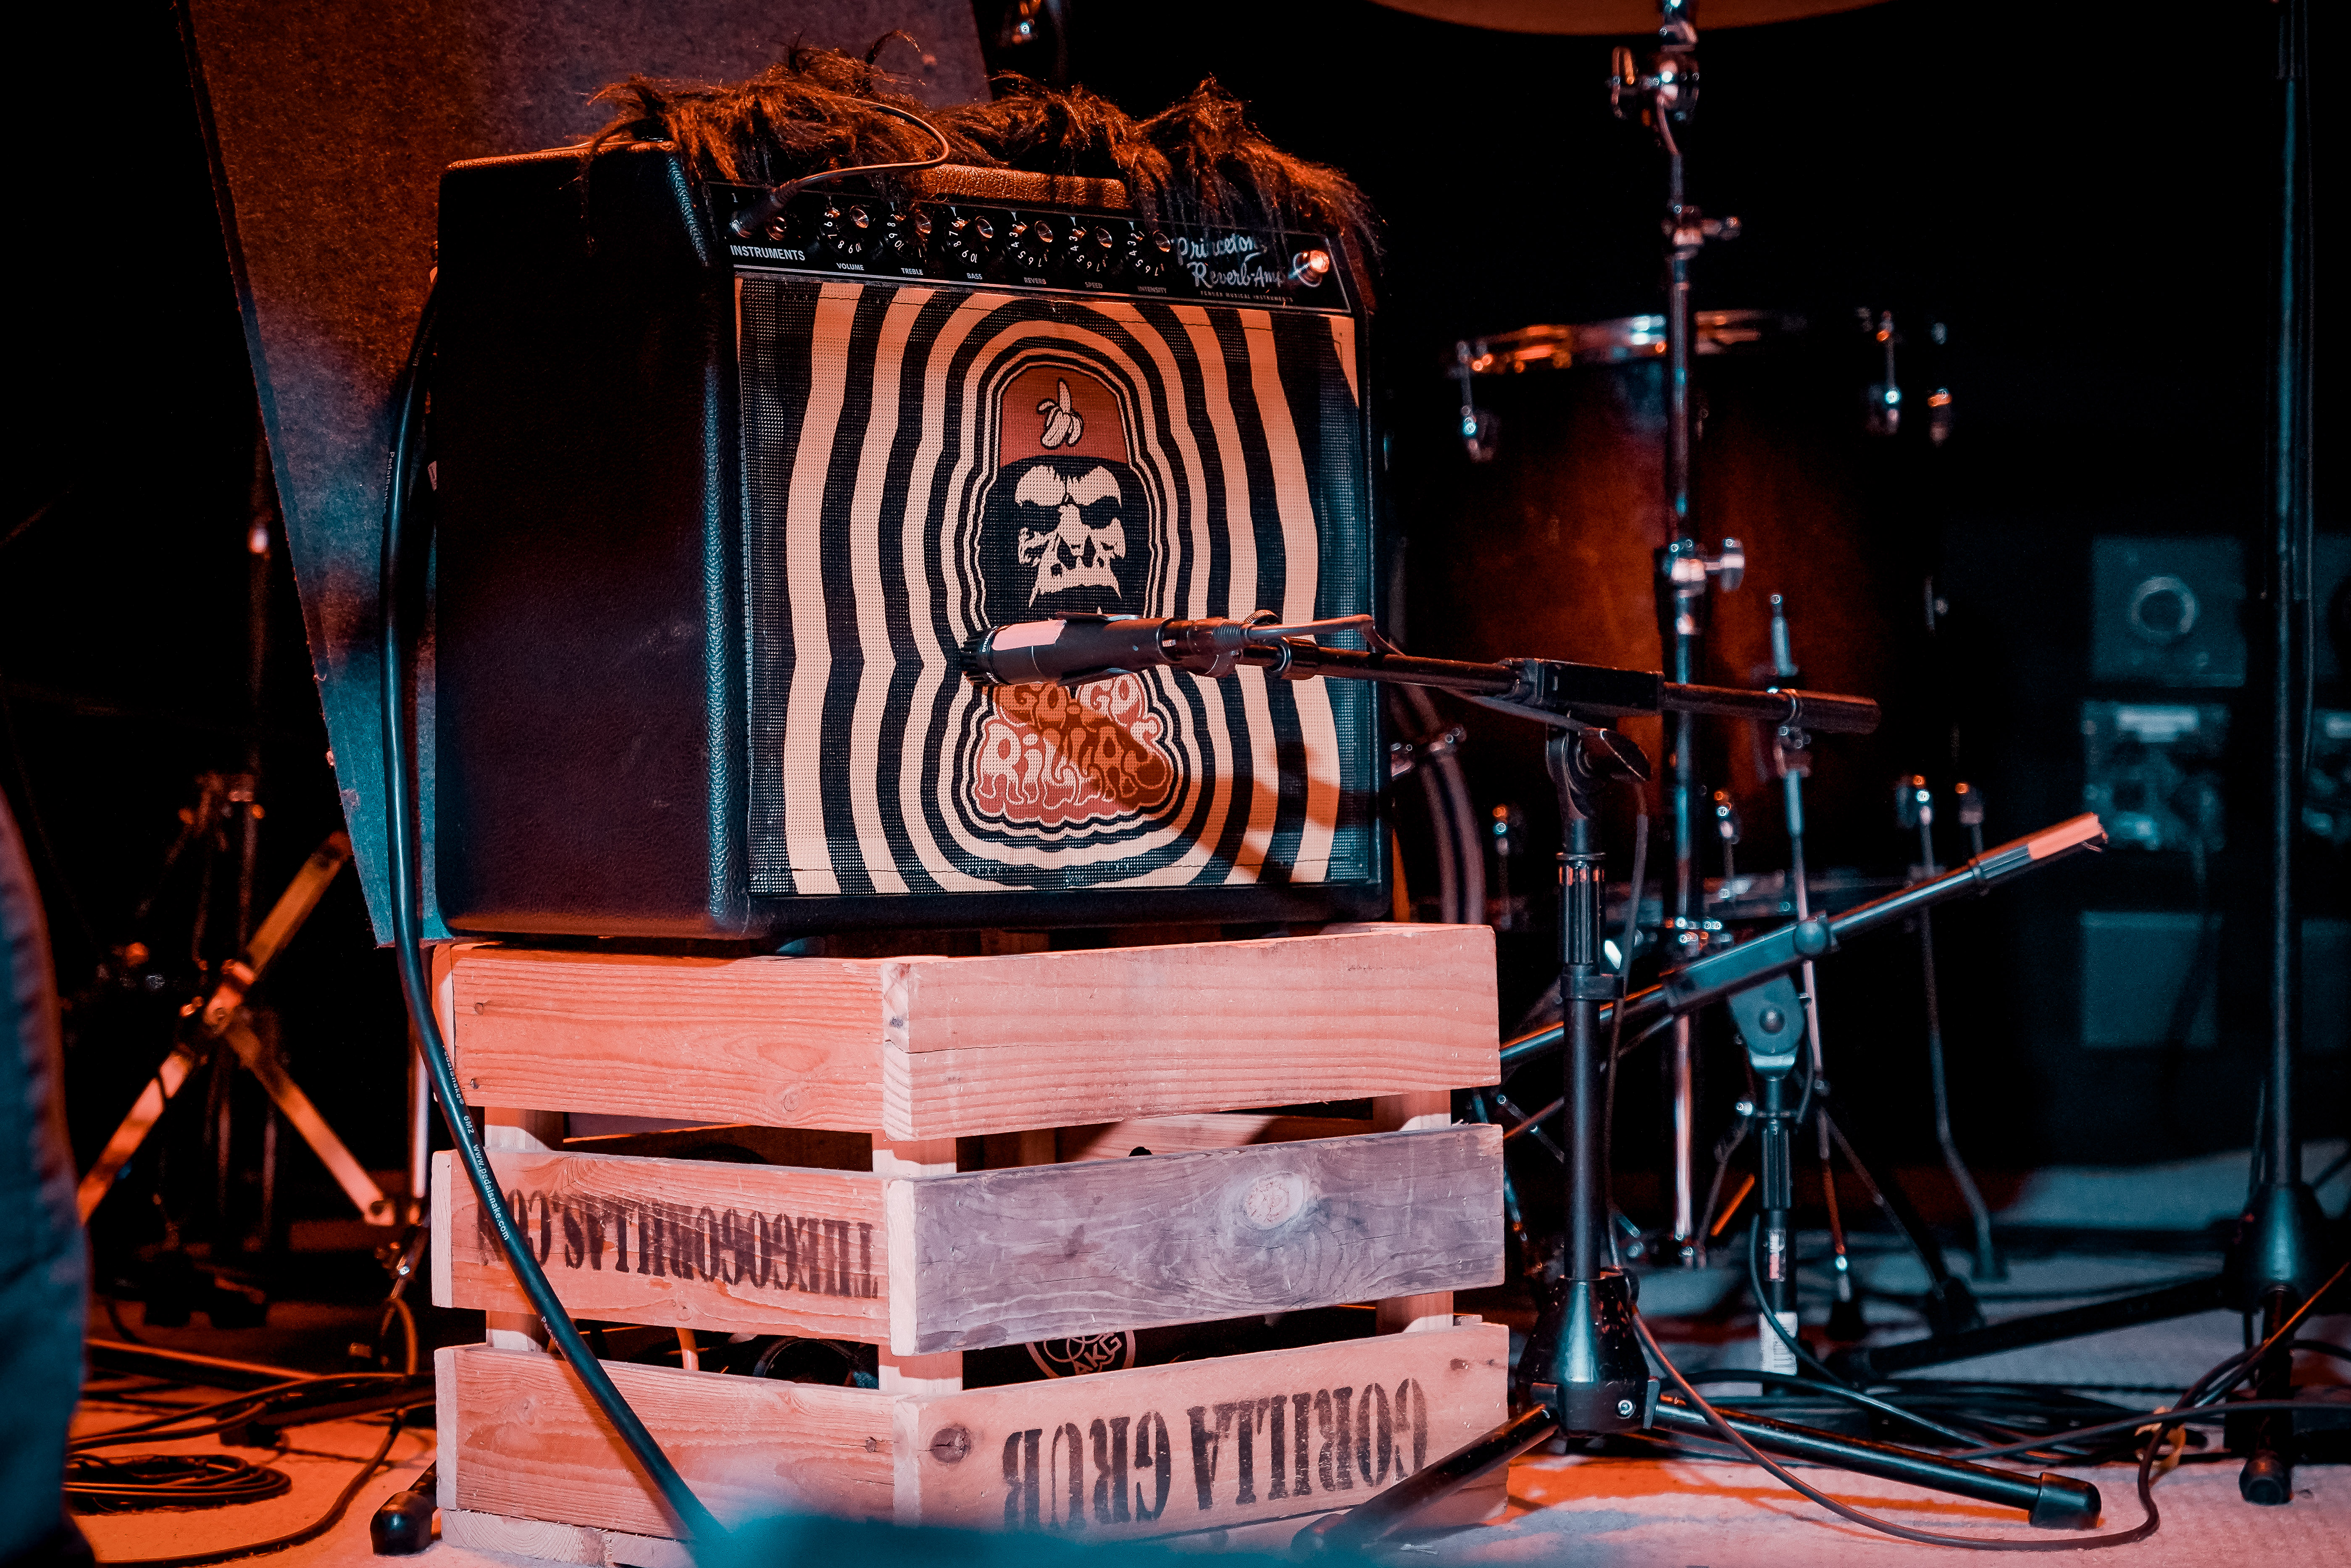 An amp on stage with gorilla artwork